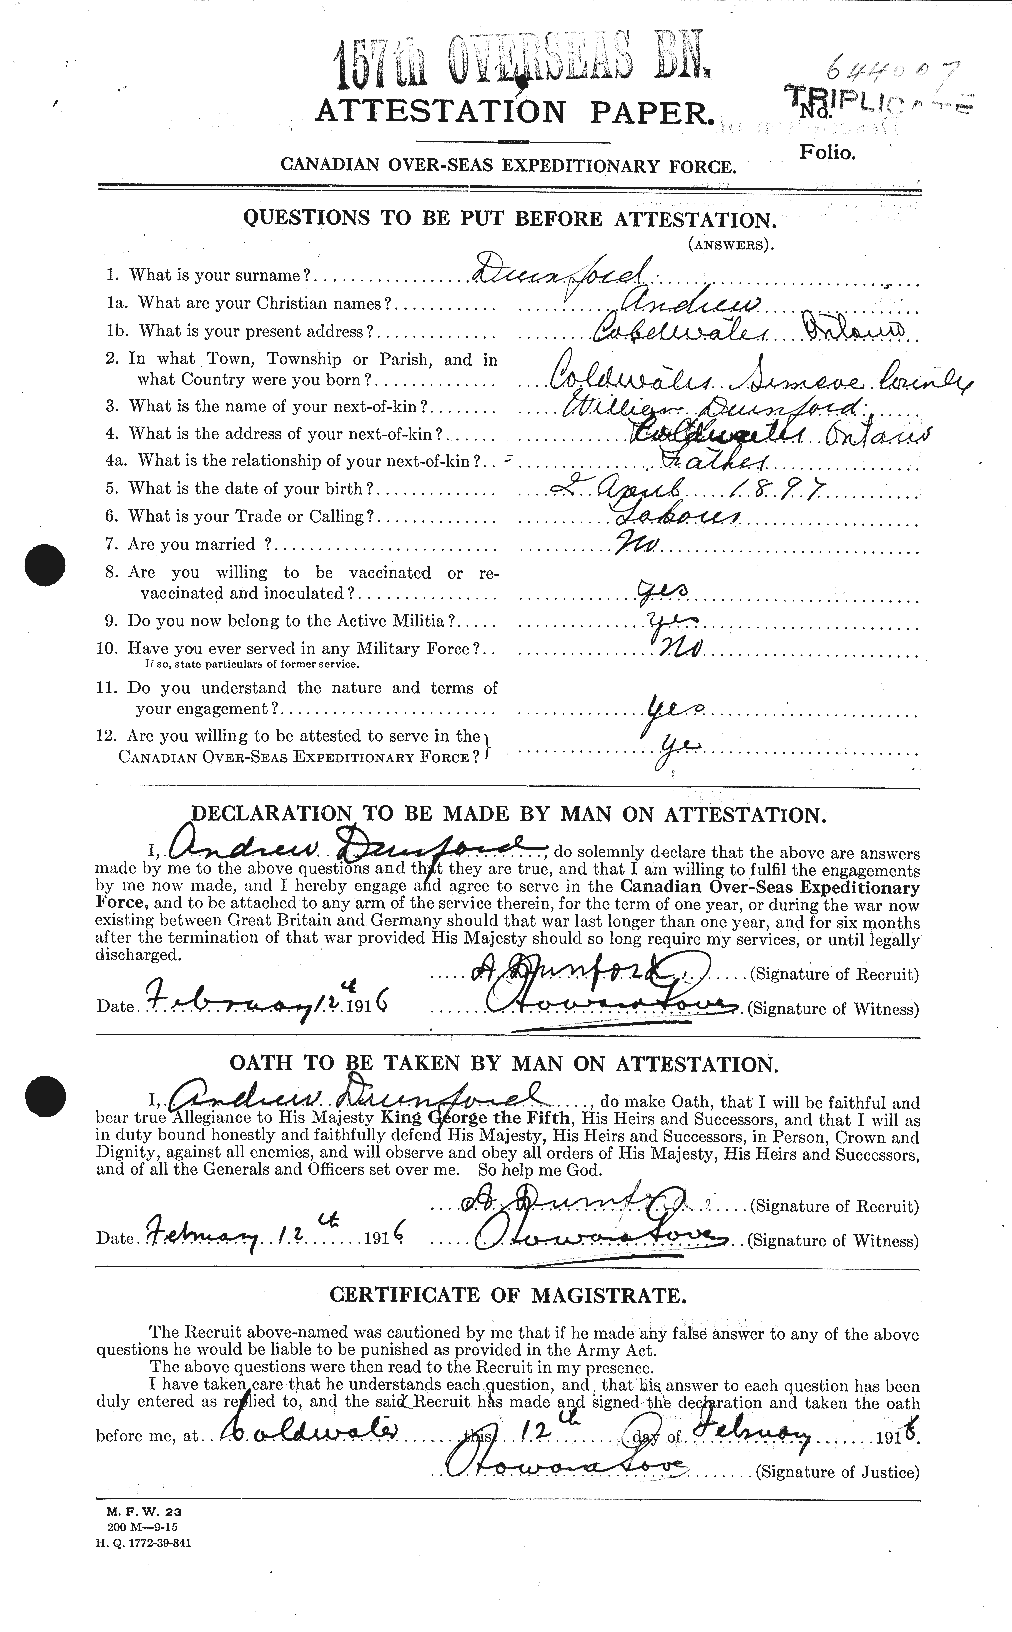 Personnel Records of the First World War - CEF 305274a